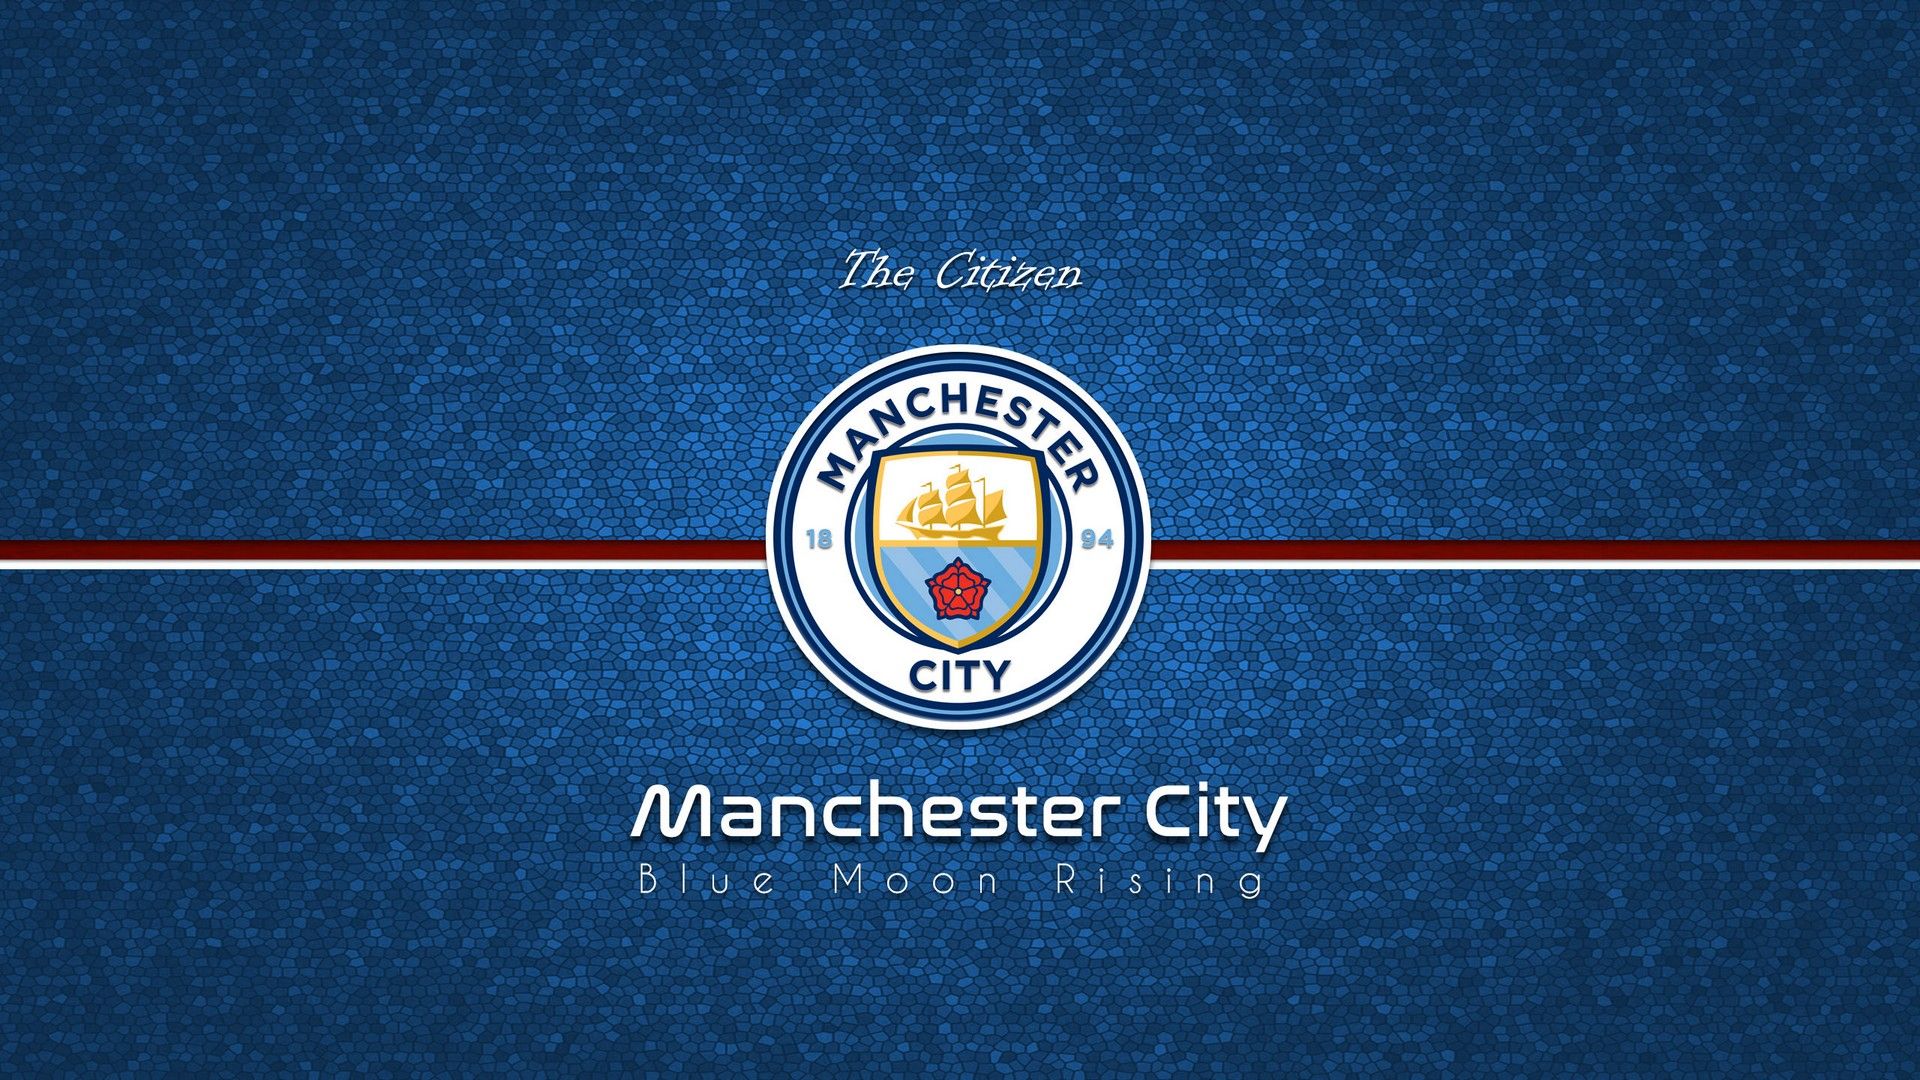 Manchester City 2021 Wallpapers - Wallpaper Cave